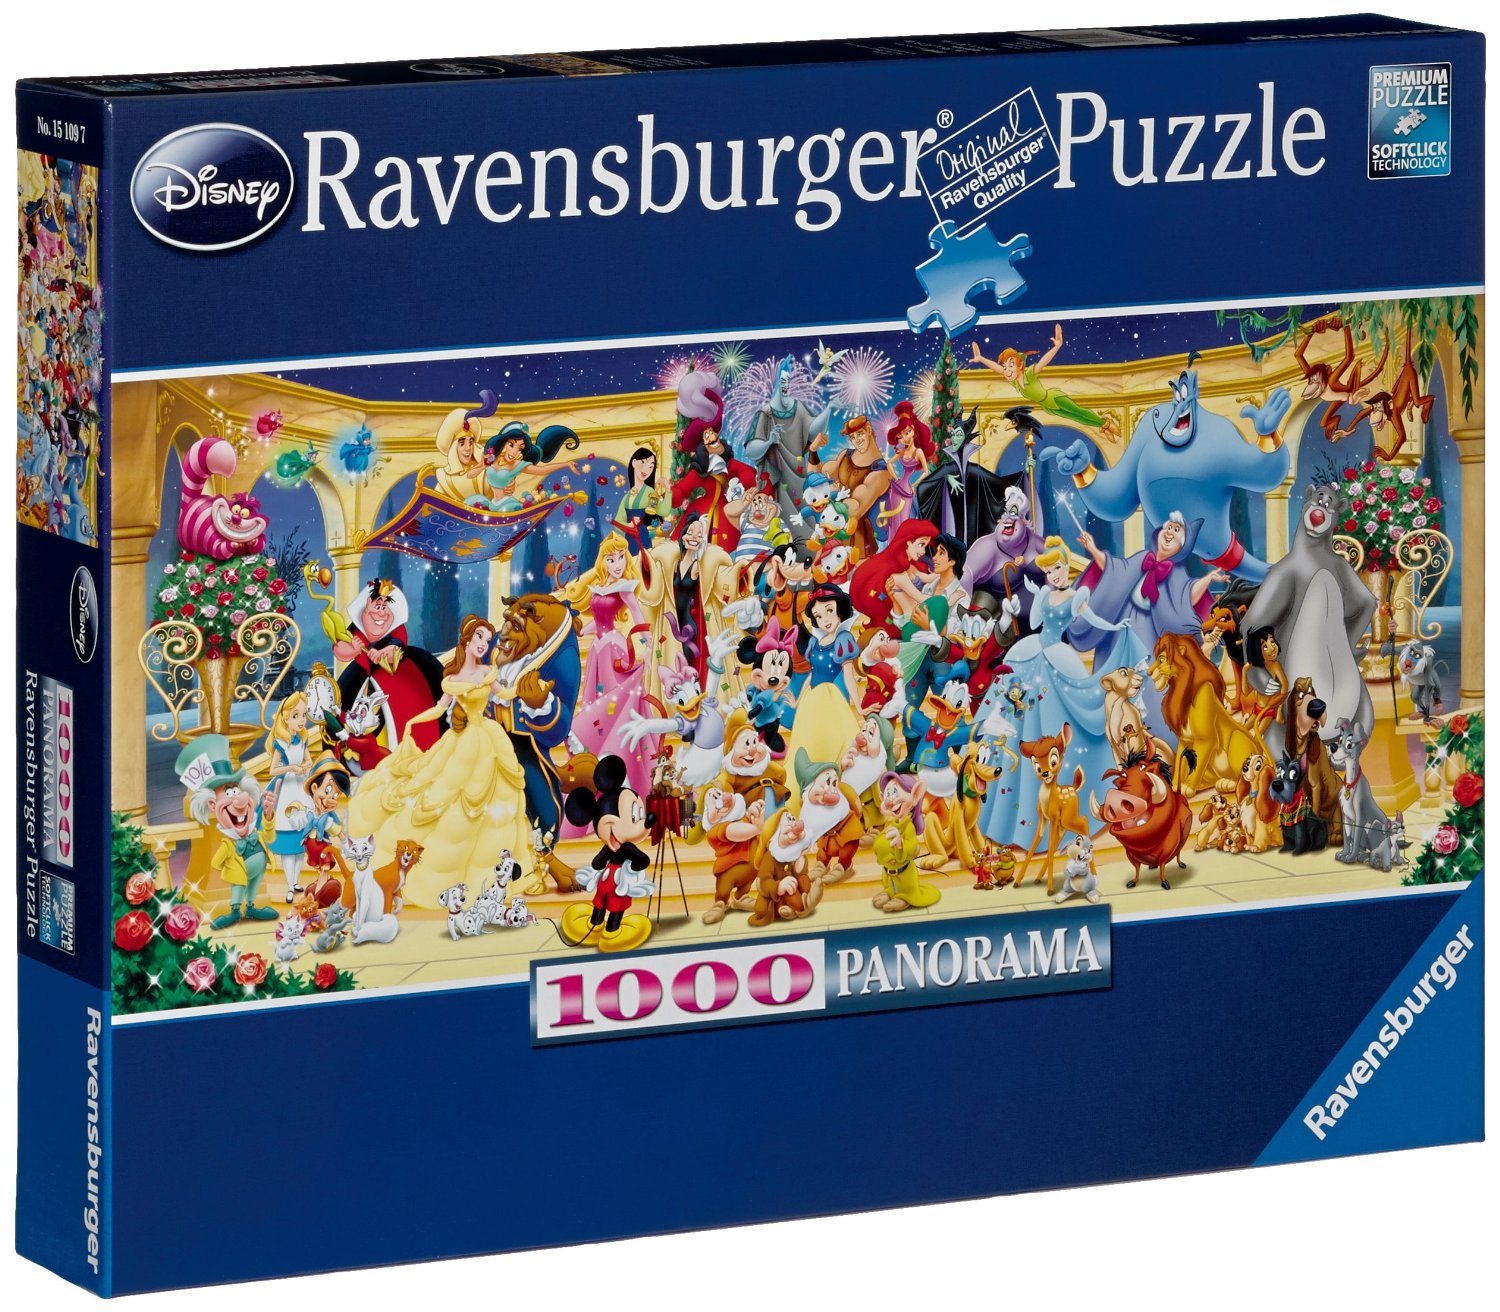 Top 5 Favorite Disney Puzzles For a Cozy Winter Night In